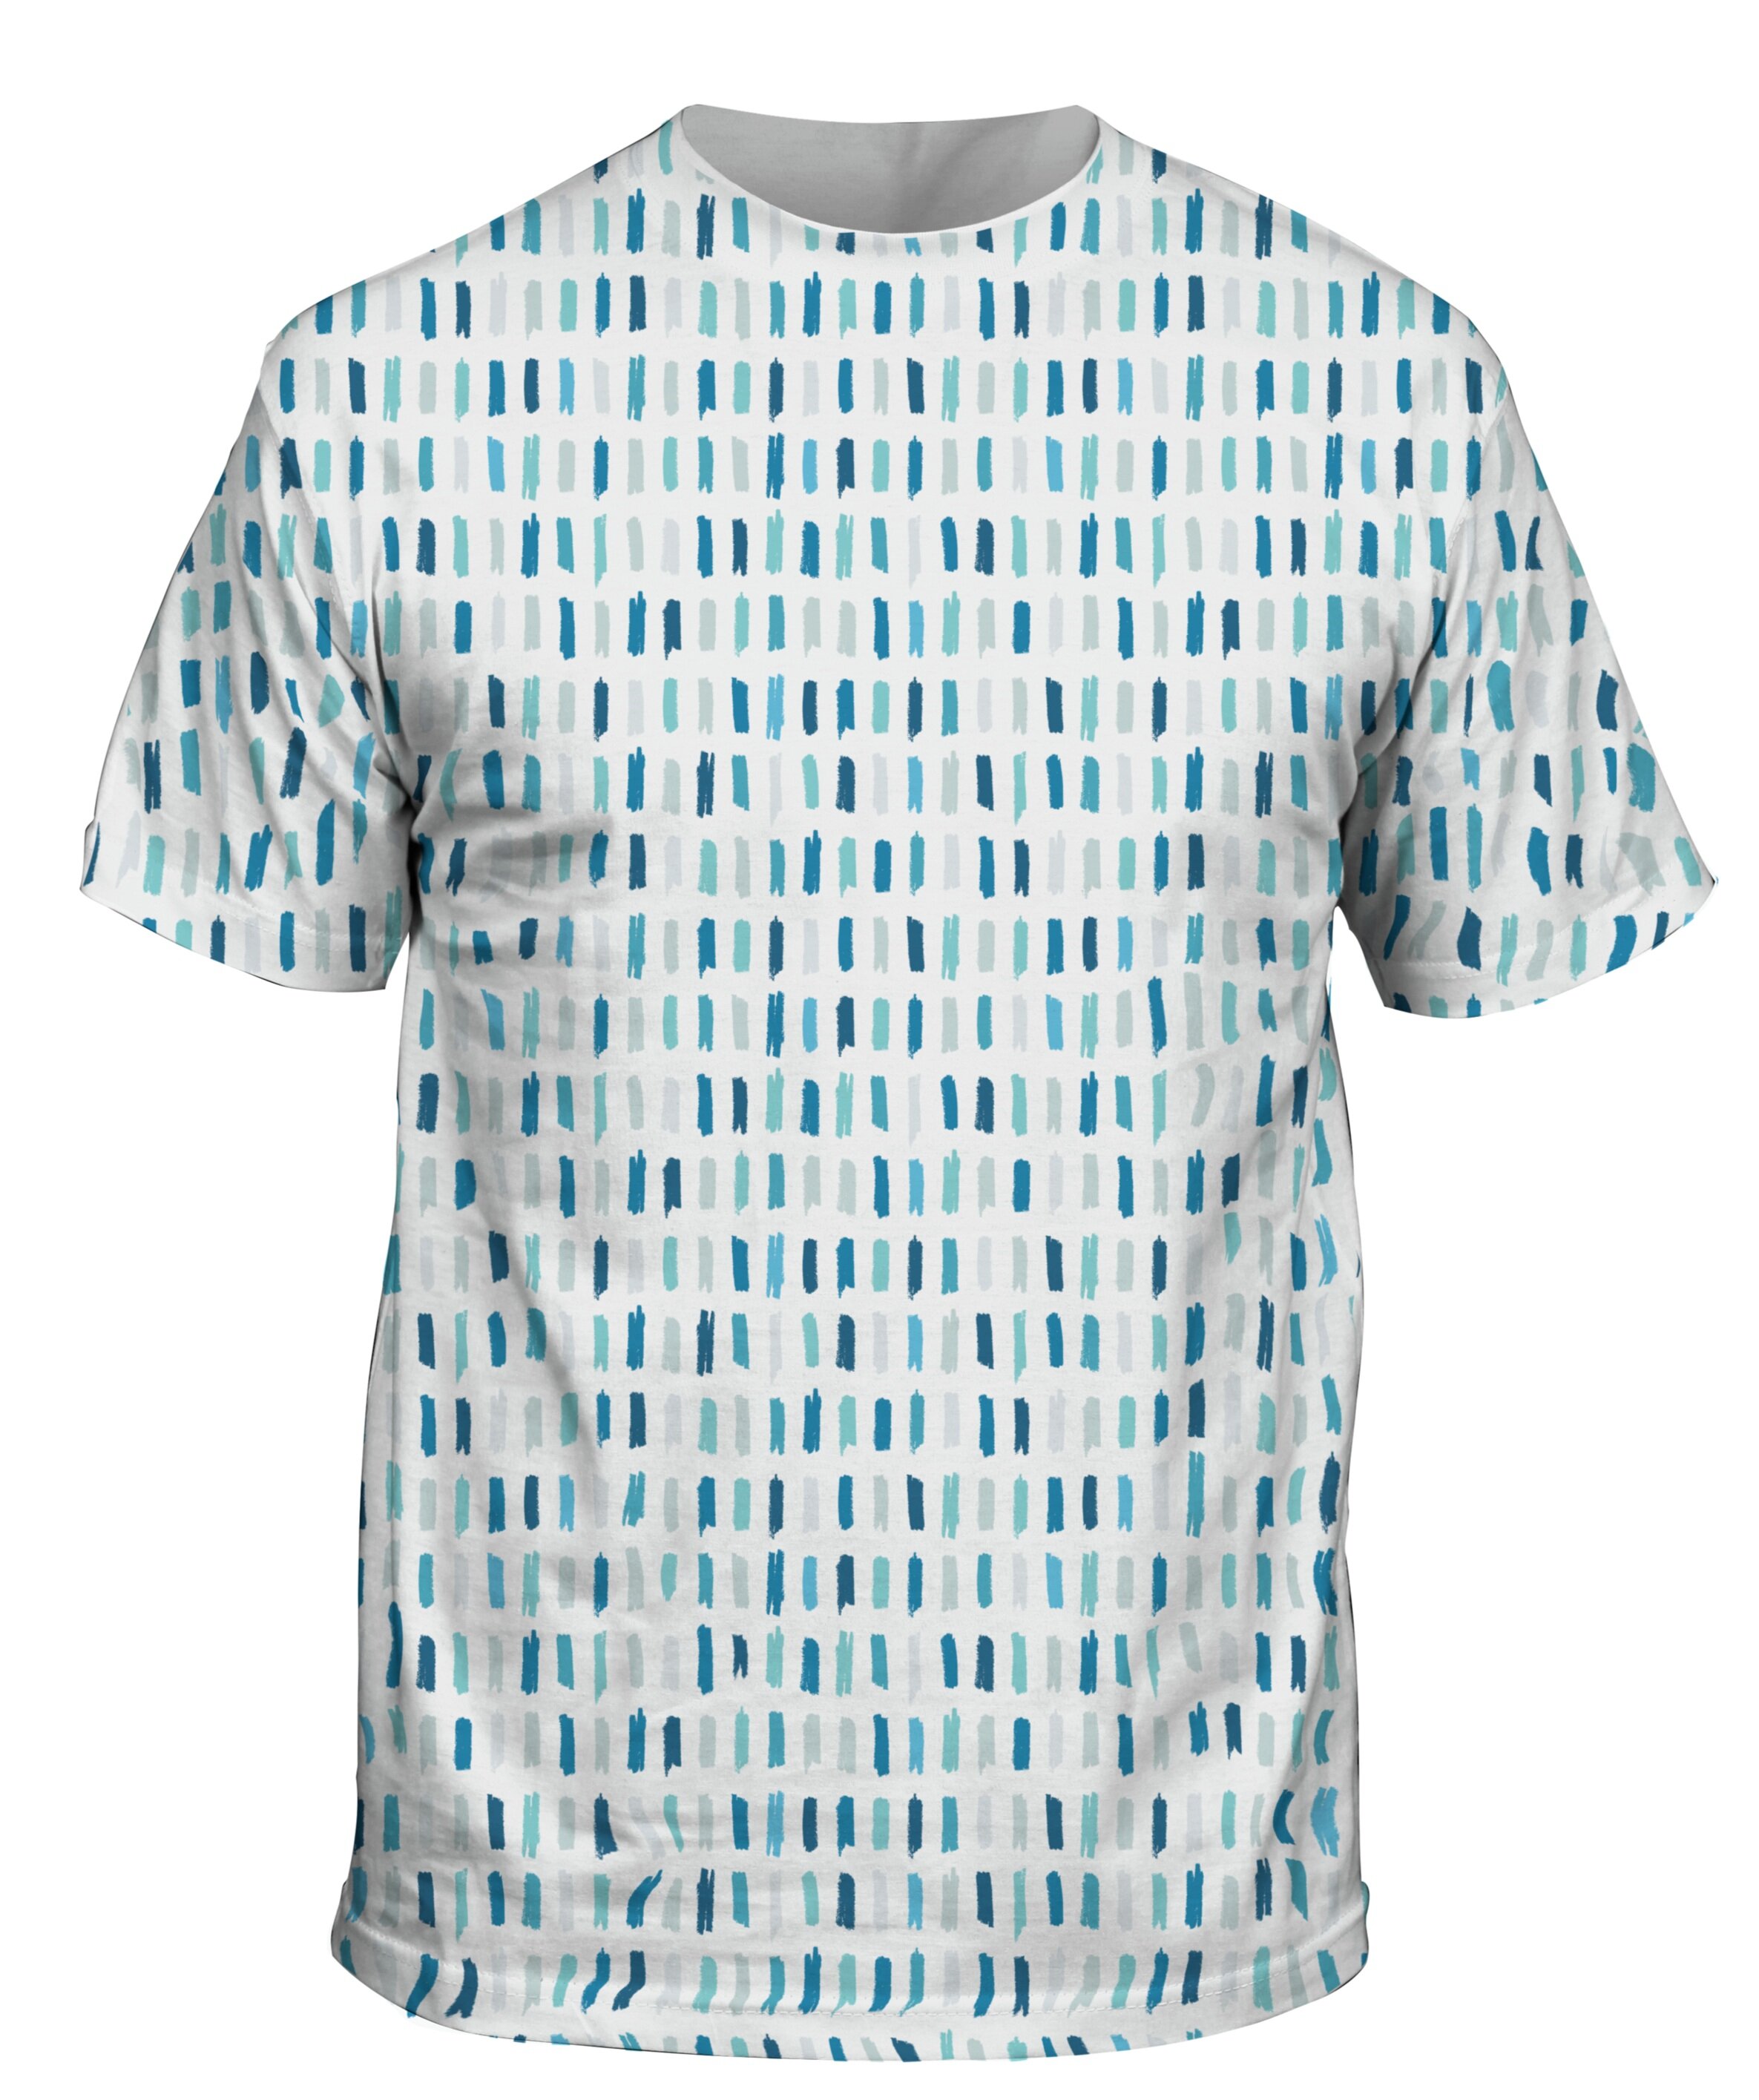 custom sublimated t shirt with blue all over design made in usa (Copy)